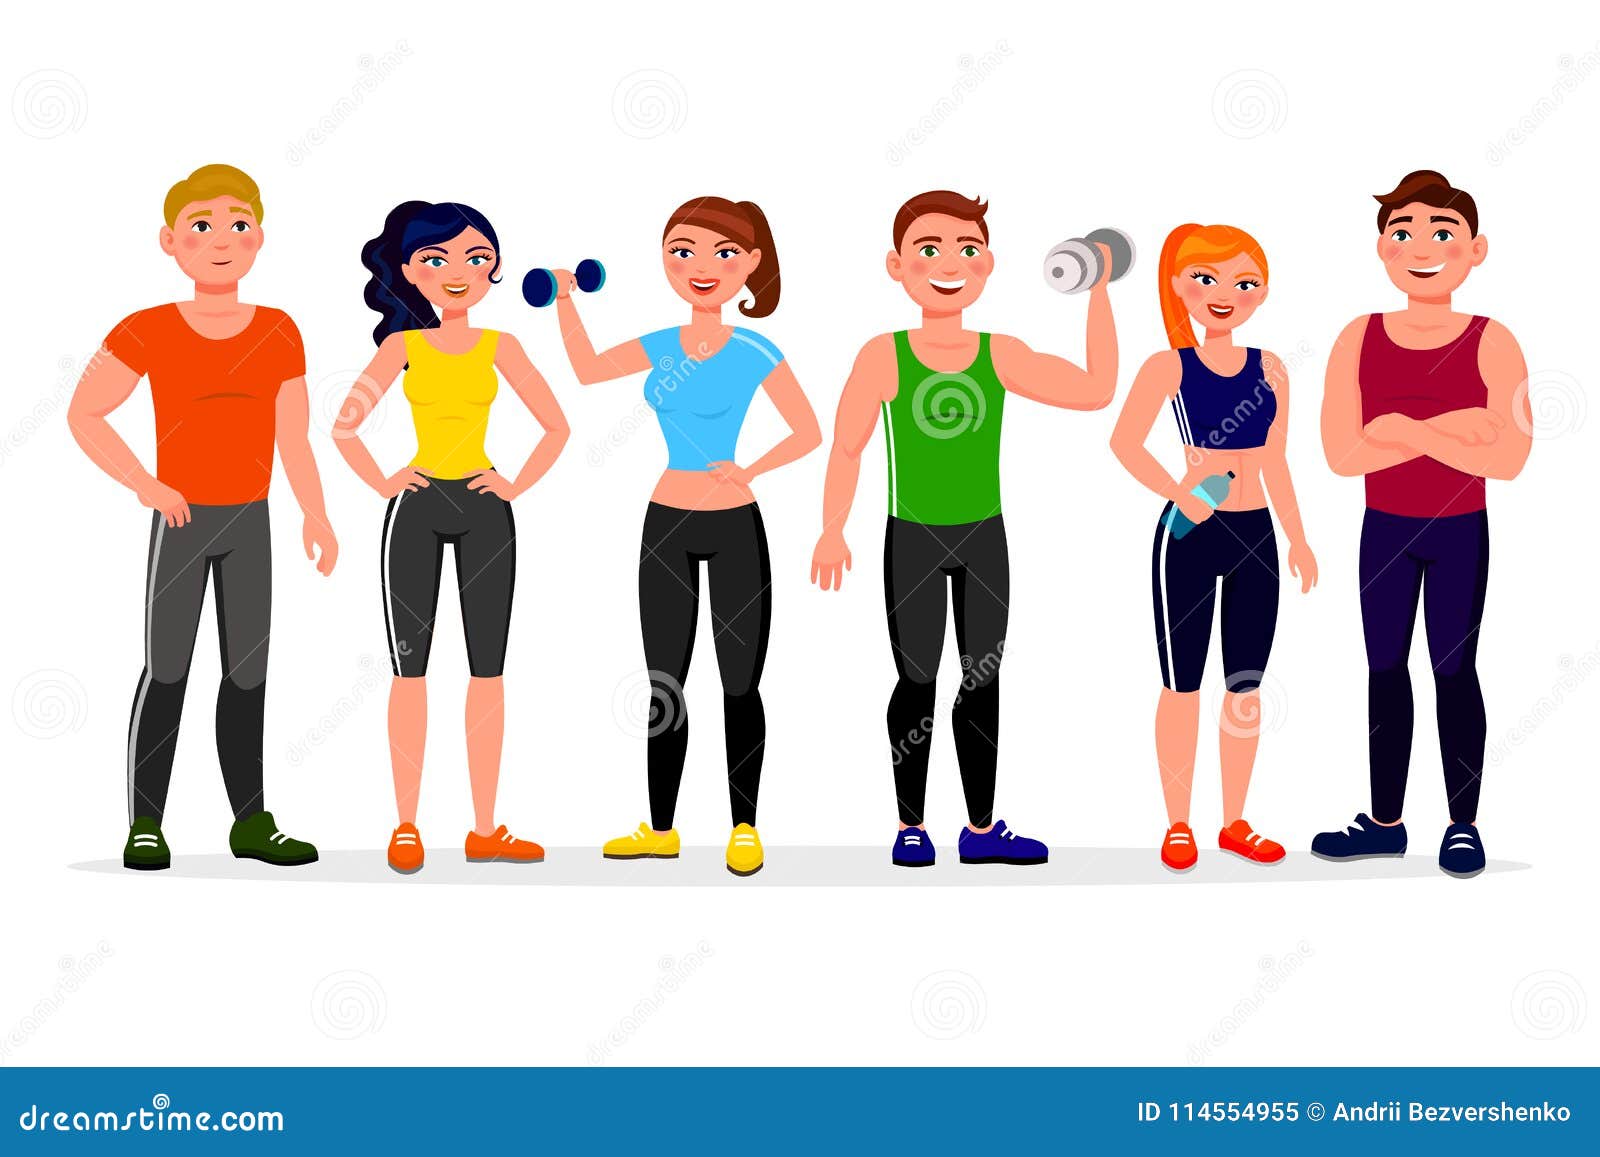 Fitness People Illustration In Flat Design Athletes In Workout Gym